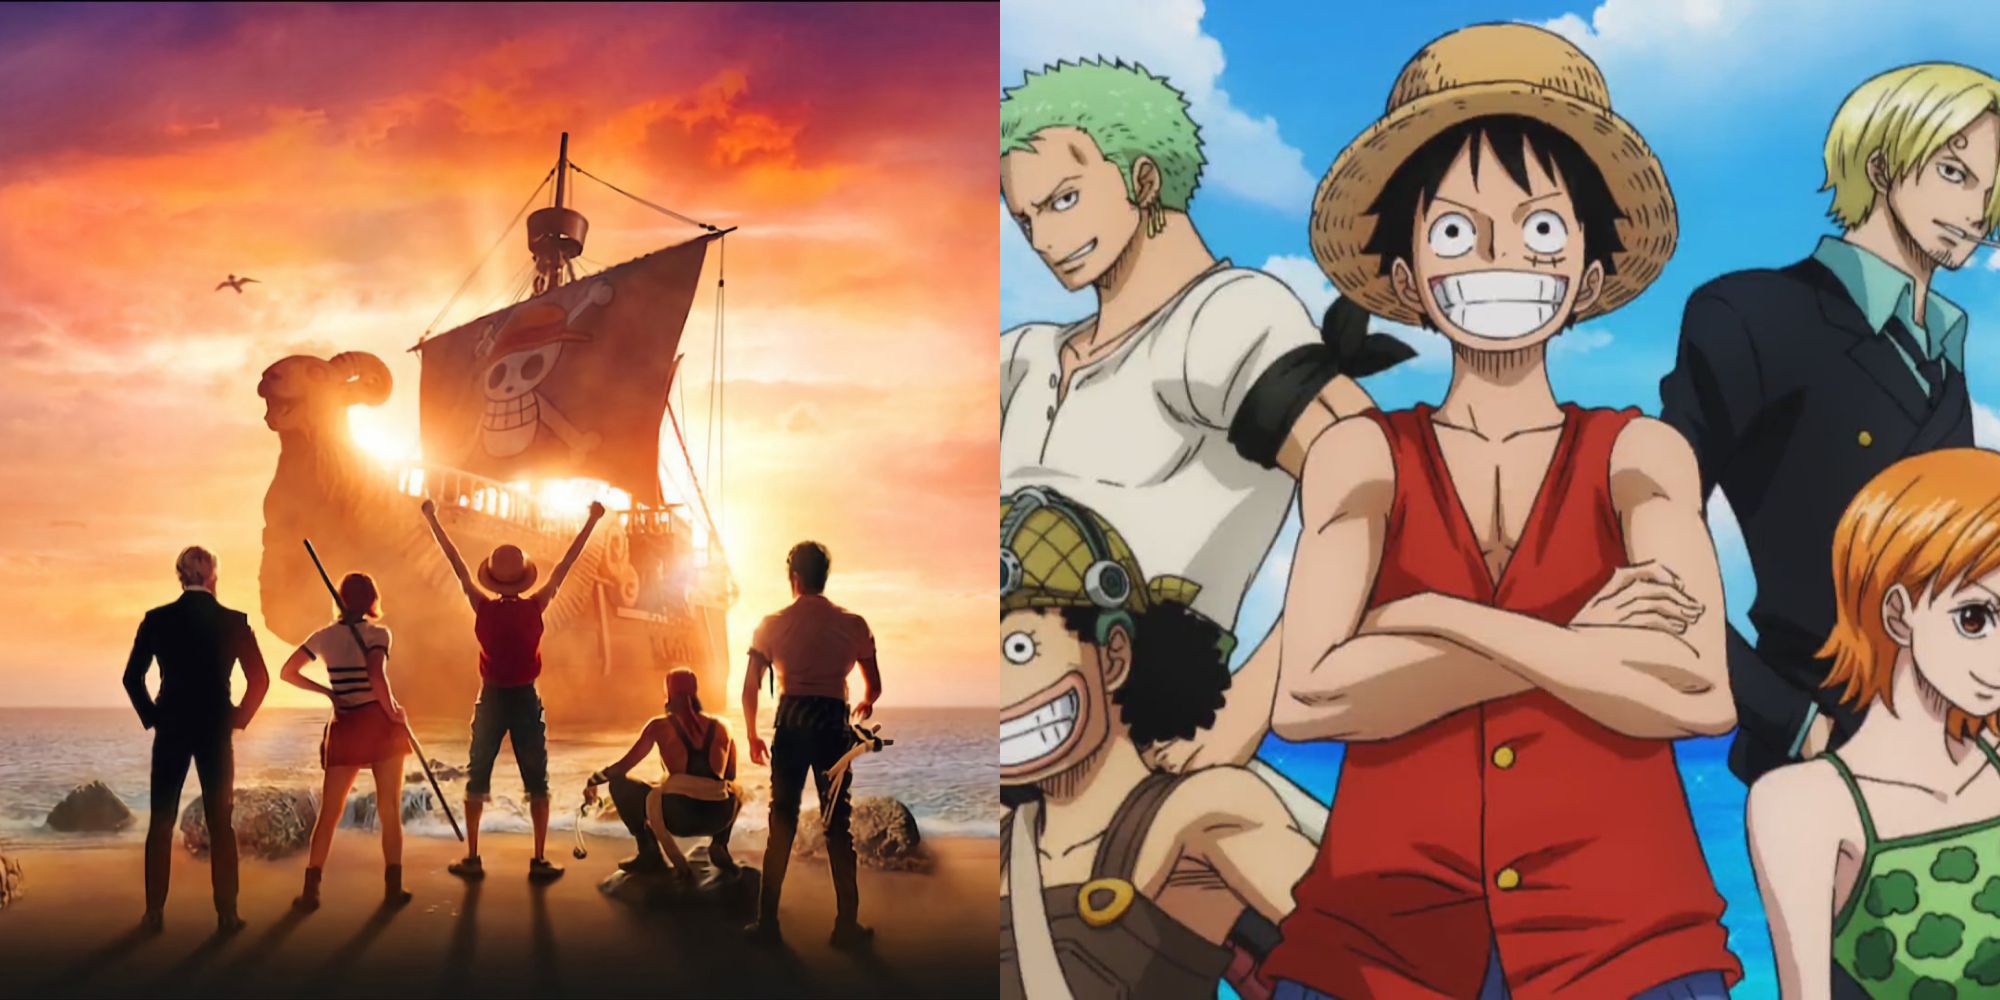 The Netflix One Piece cast compared to the anime